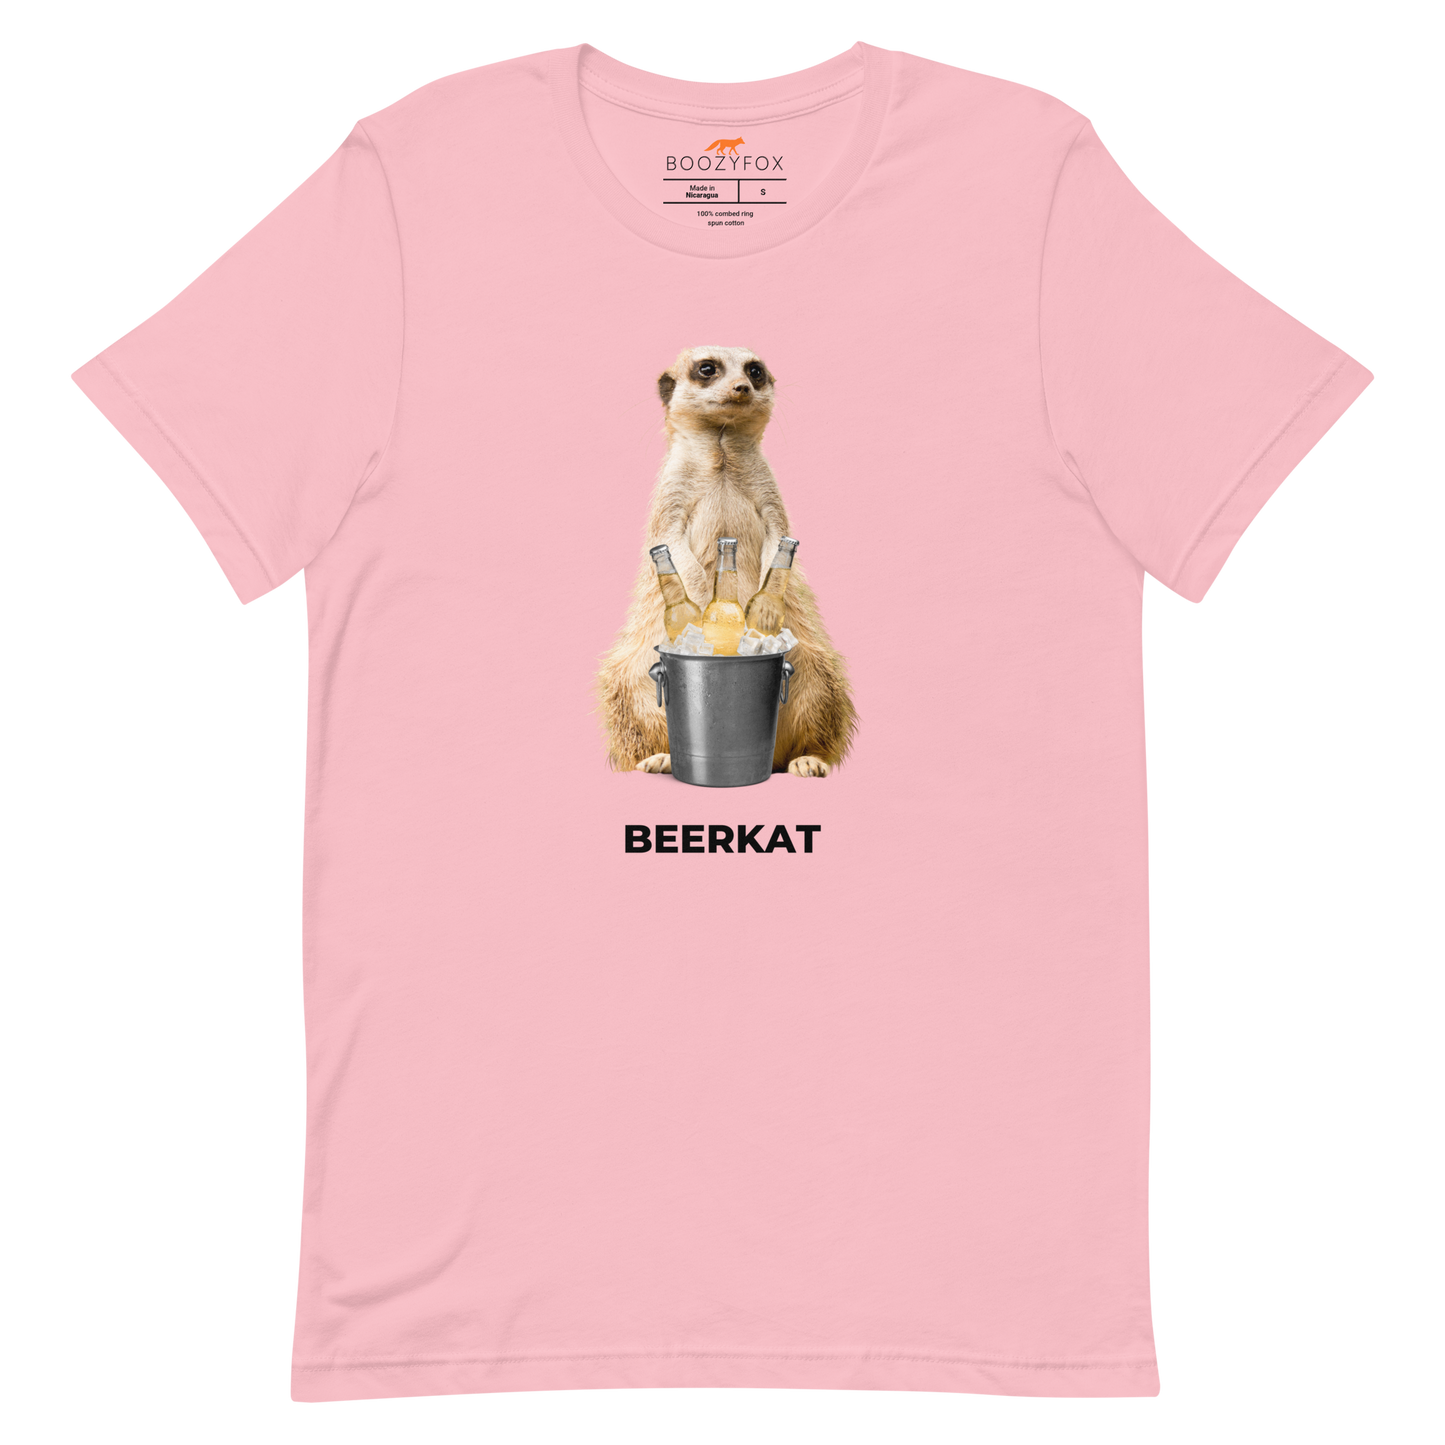 Pink Premium Meerkat T-Shirt featuring a hilarious Beerkat graphic on the chest - Funny Graphic Meerkat Tees - Boozy Fox